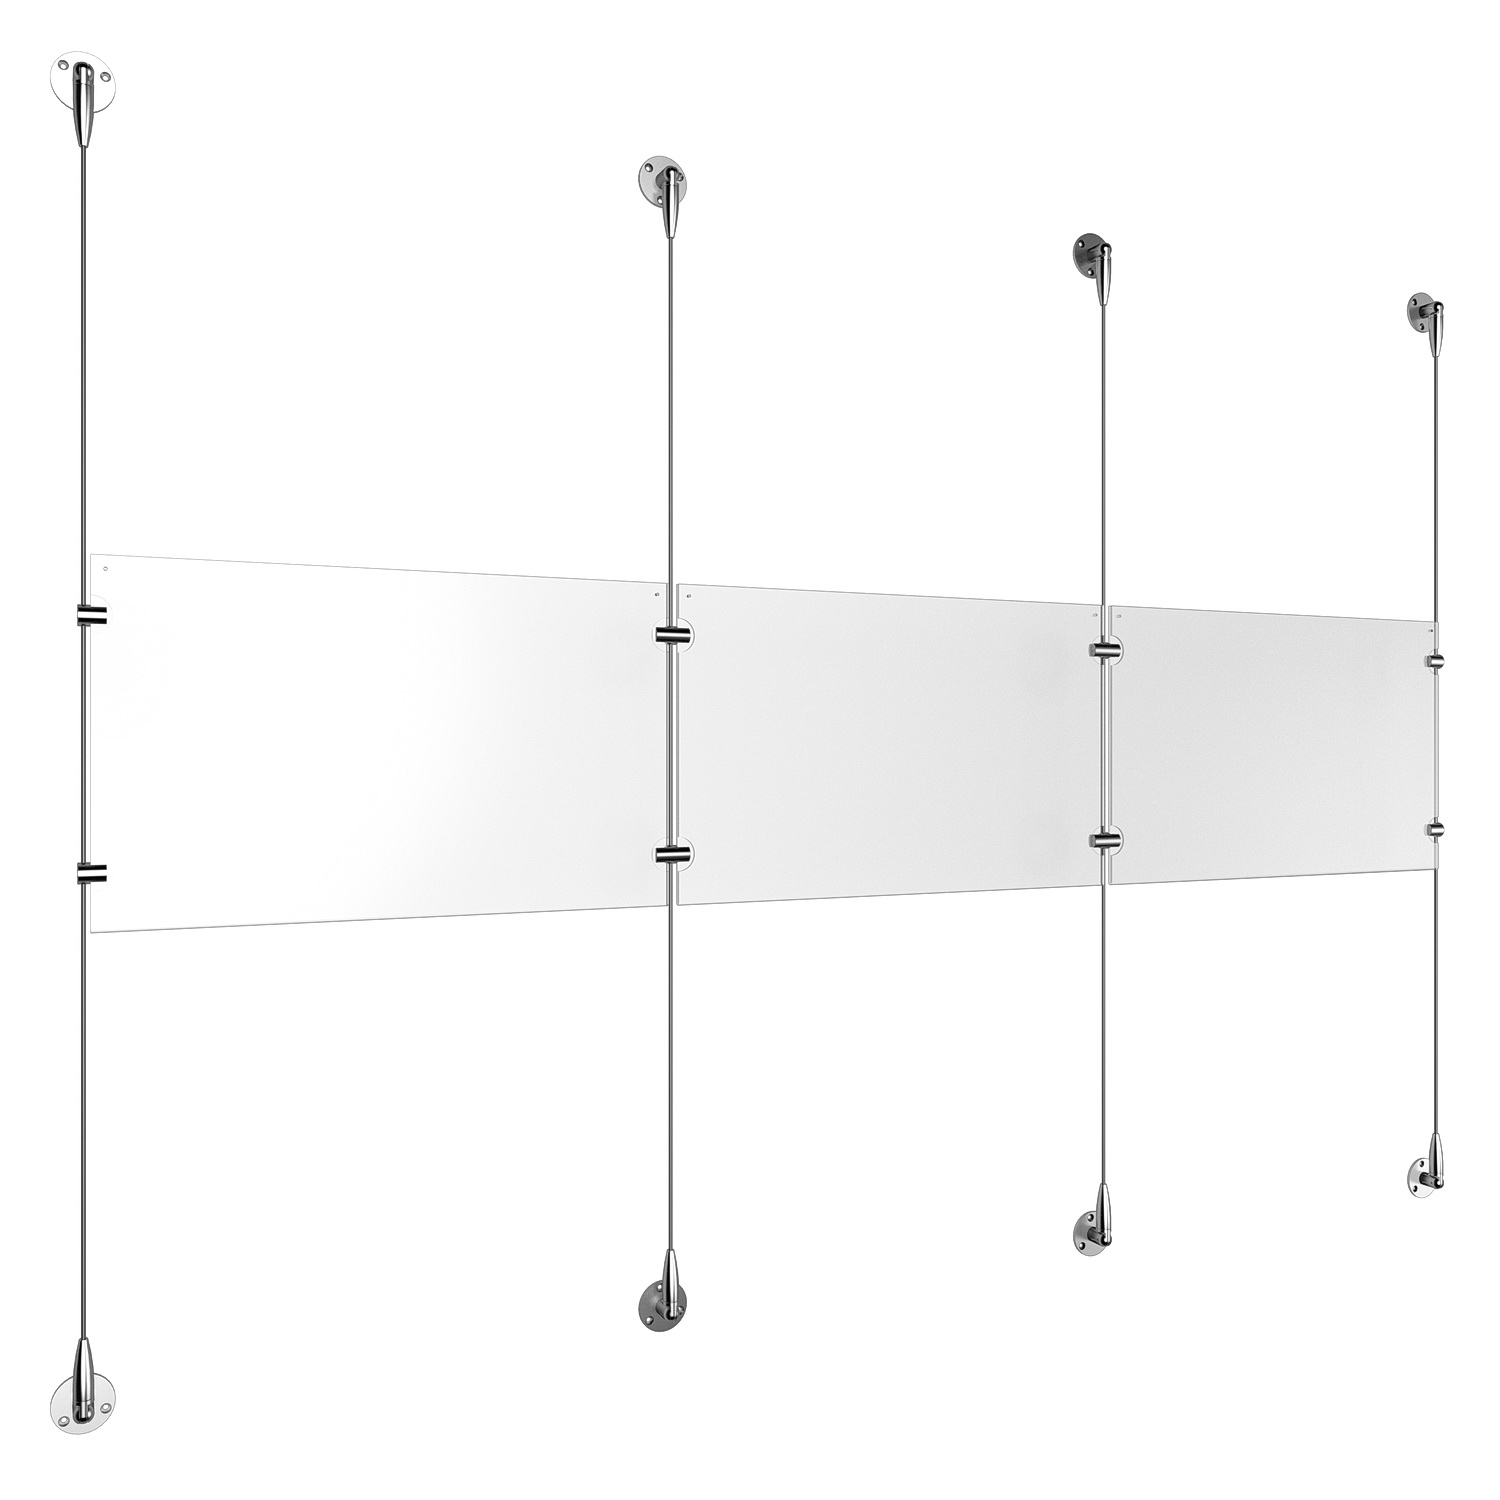 (3) 17'' Width x 11'' Height Clear Acrylic Frame & (4) Stainless Steel Satin Brushed Adjustable Angle Signature 1/8'' Cable Systems with (4) Single-Sided Panel Grippers (4) Double-Sided Panel Grippers